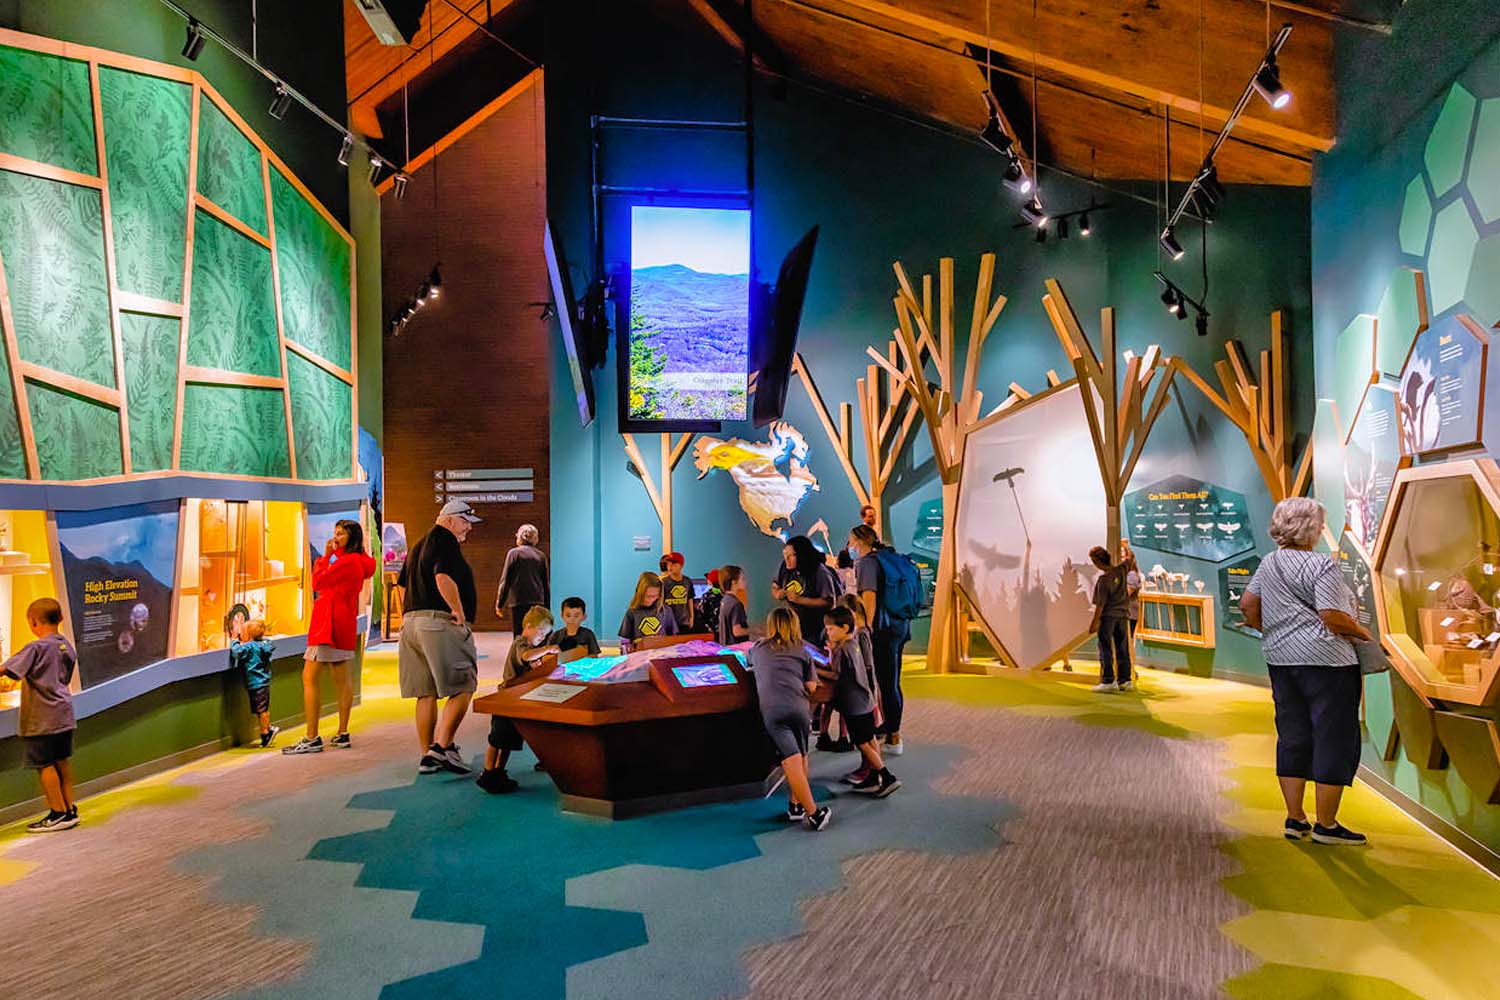 Wilson Center for Nature Discovery in Linville, N.C